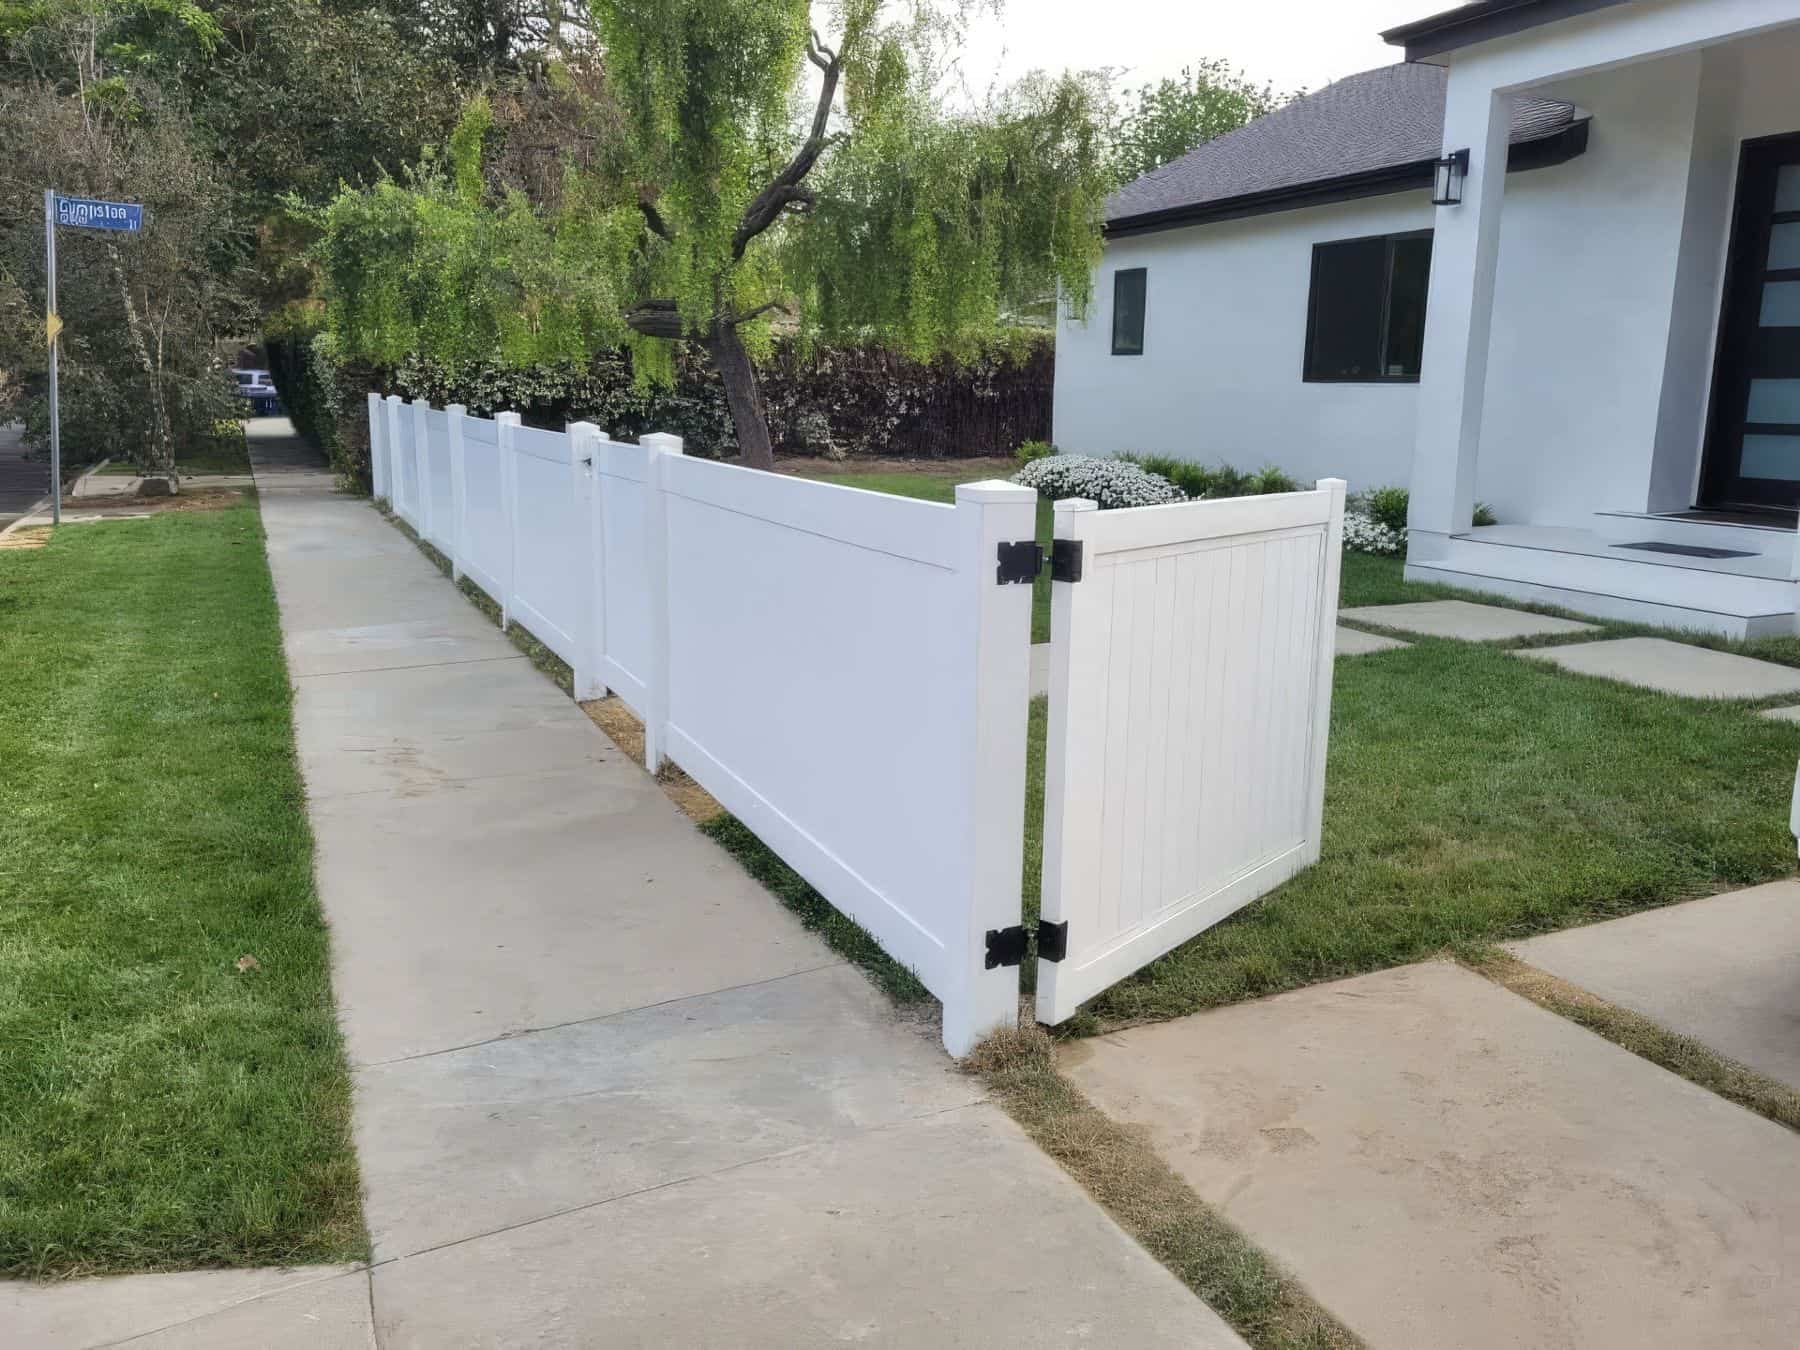 Vinyl fence gate & concrete sidewalk lead to charming suburban house with lush front lawn & backdrop of trees.